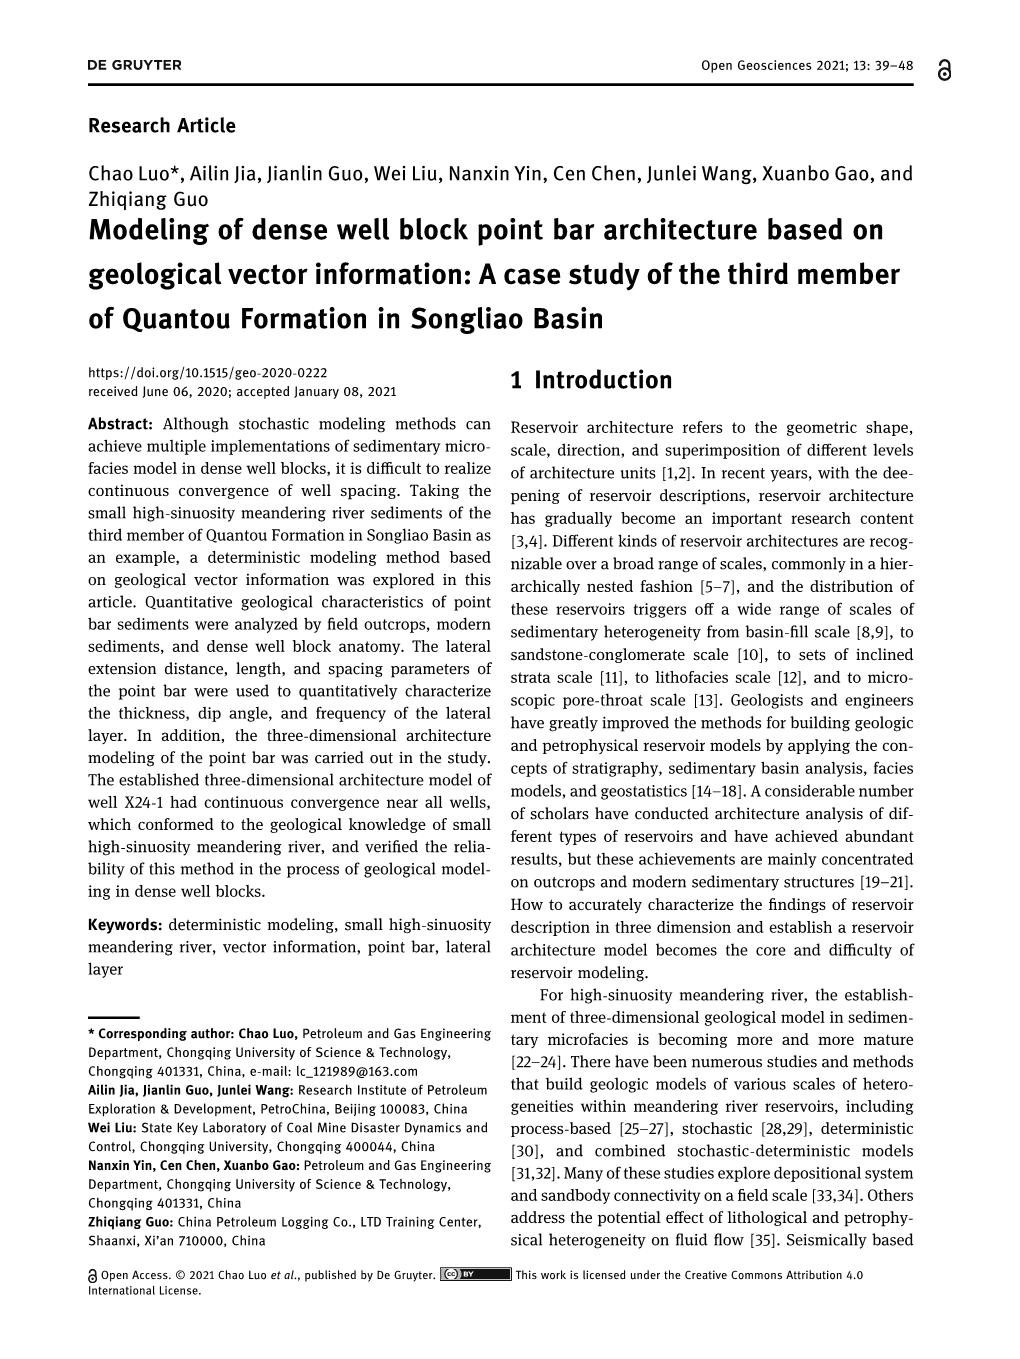 Modeling of Dense Well Block Point Bar Architecture Based on Geological